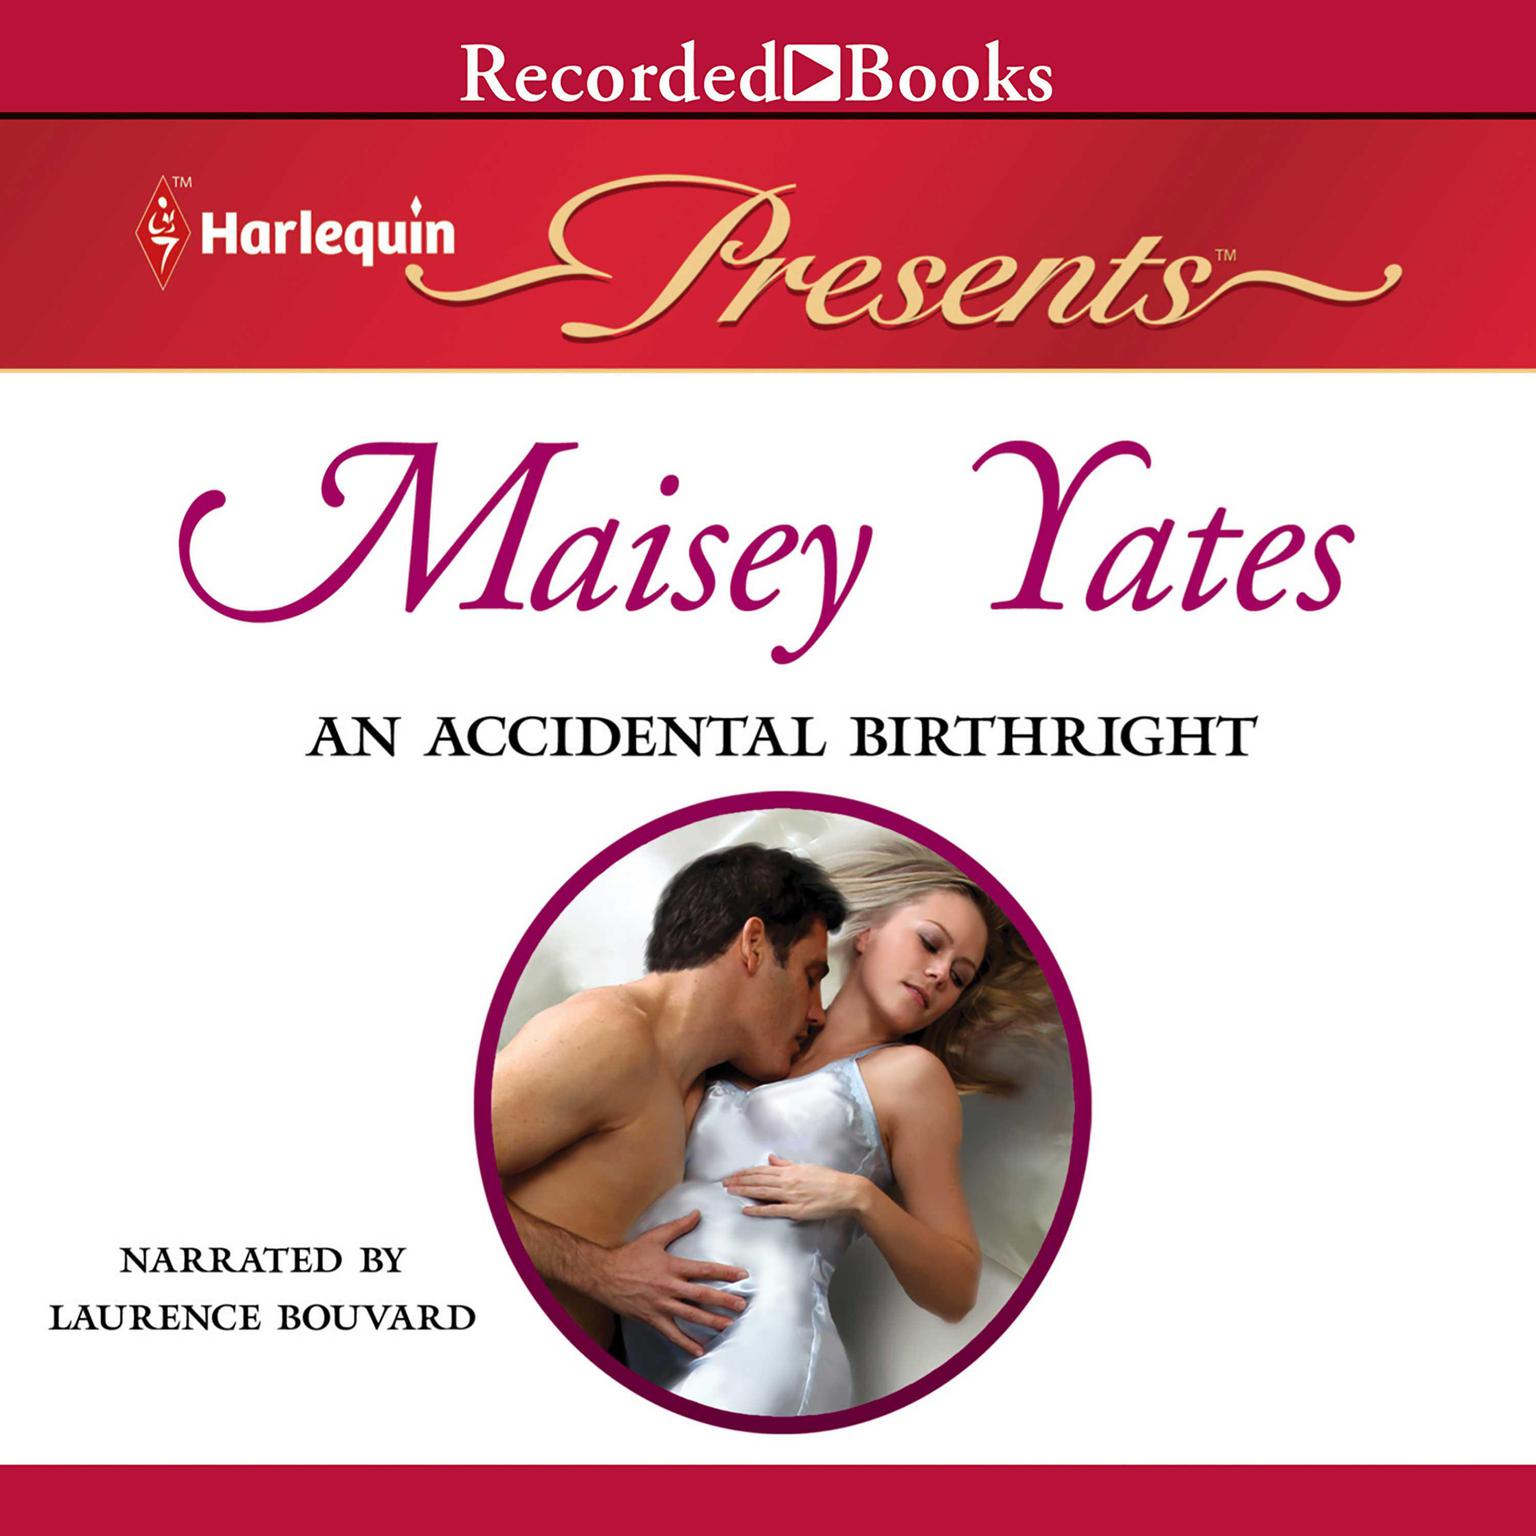 An Accidental Birthright Audiobook, by Maisey Yates